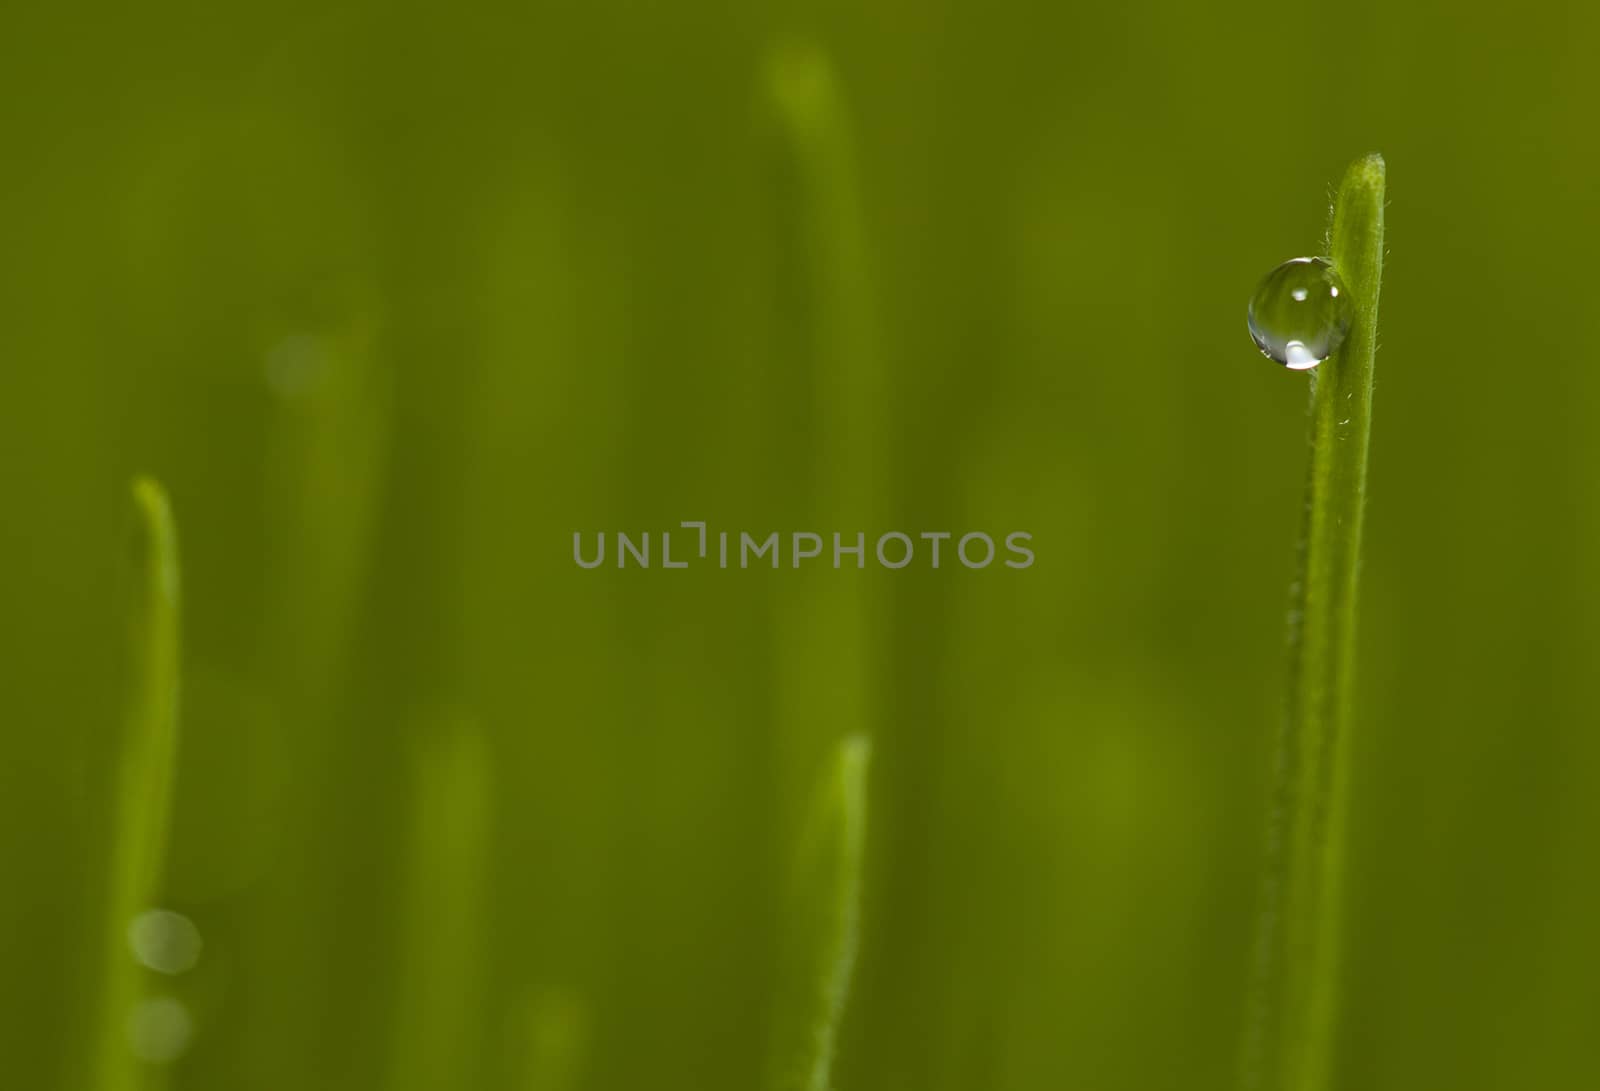 green grass with dew drops.